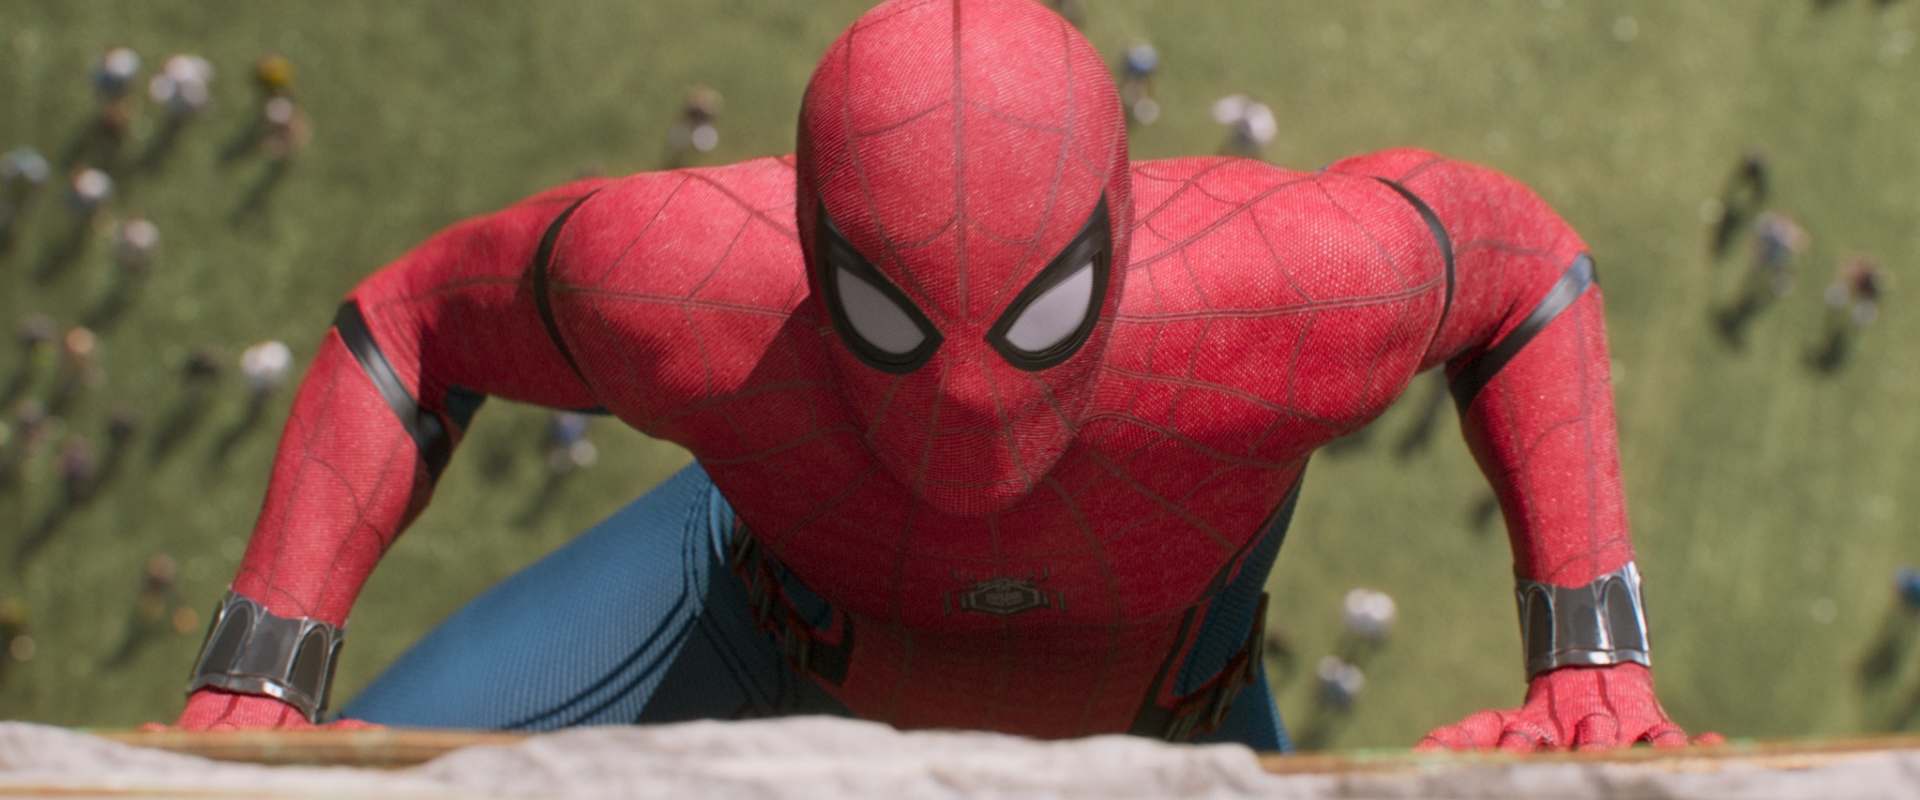 Spider-Man: Homecoming background 2